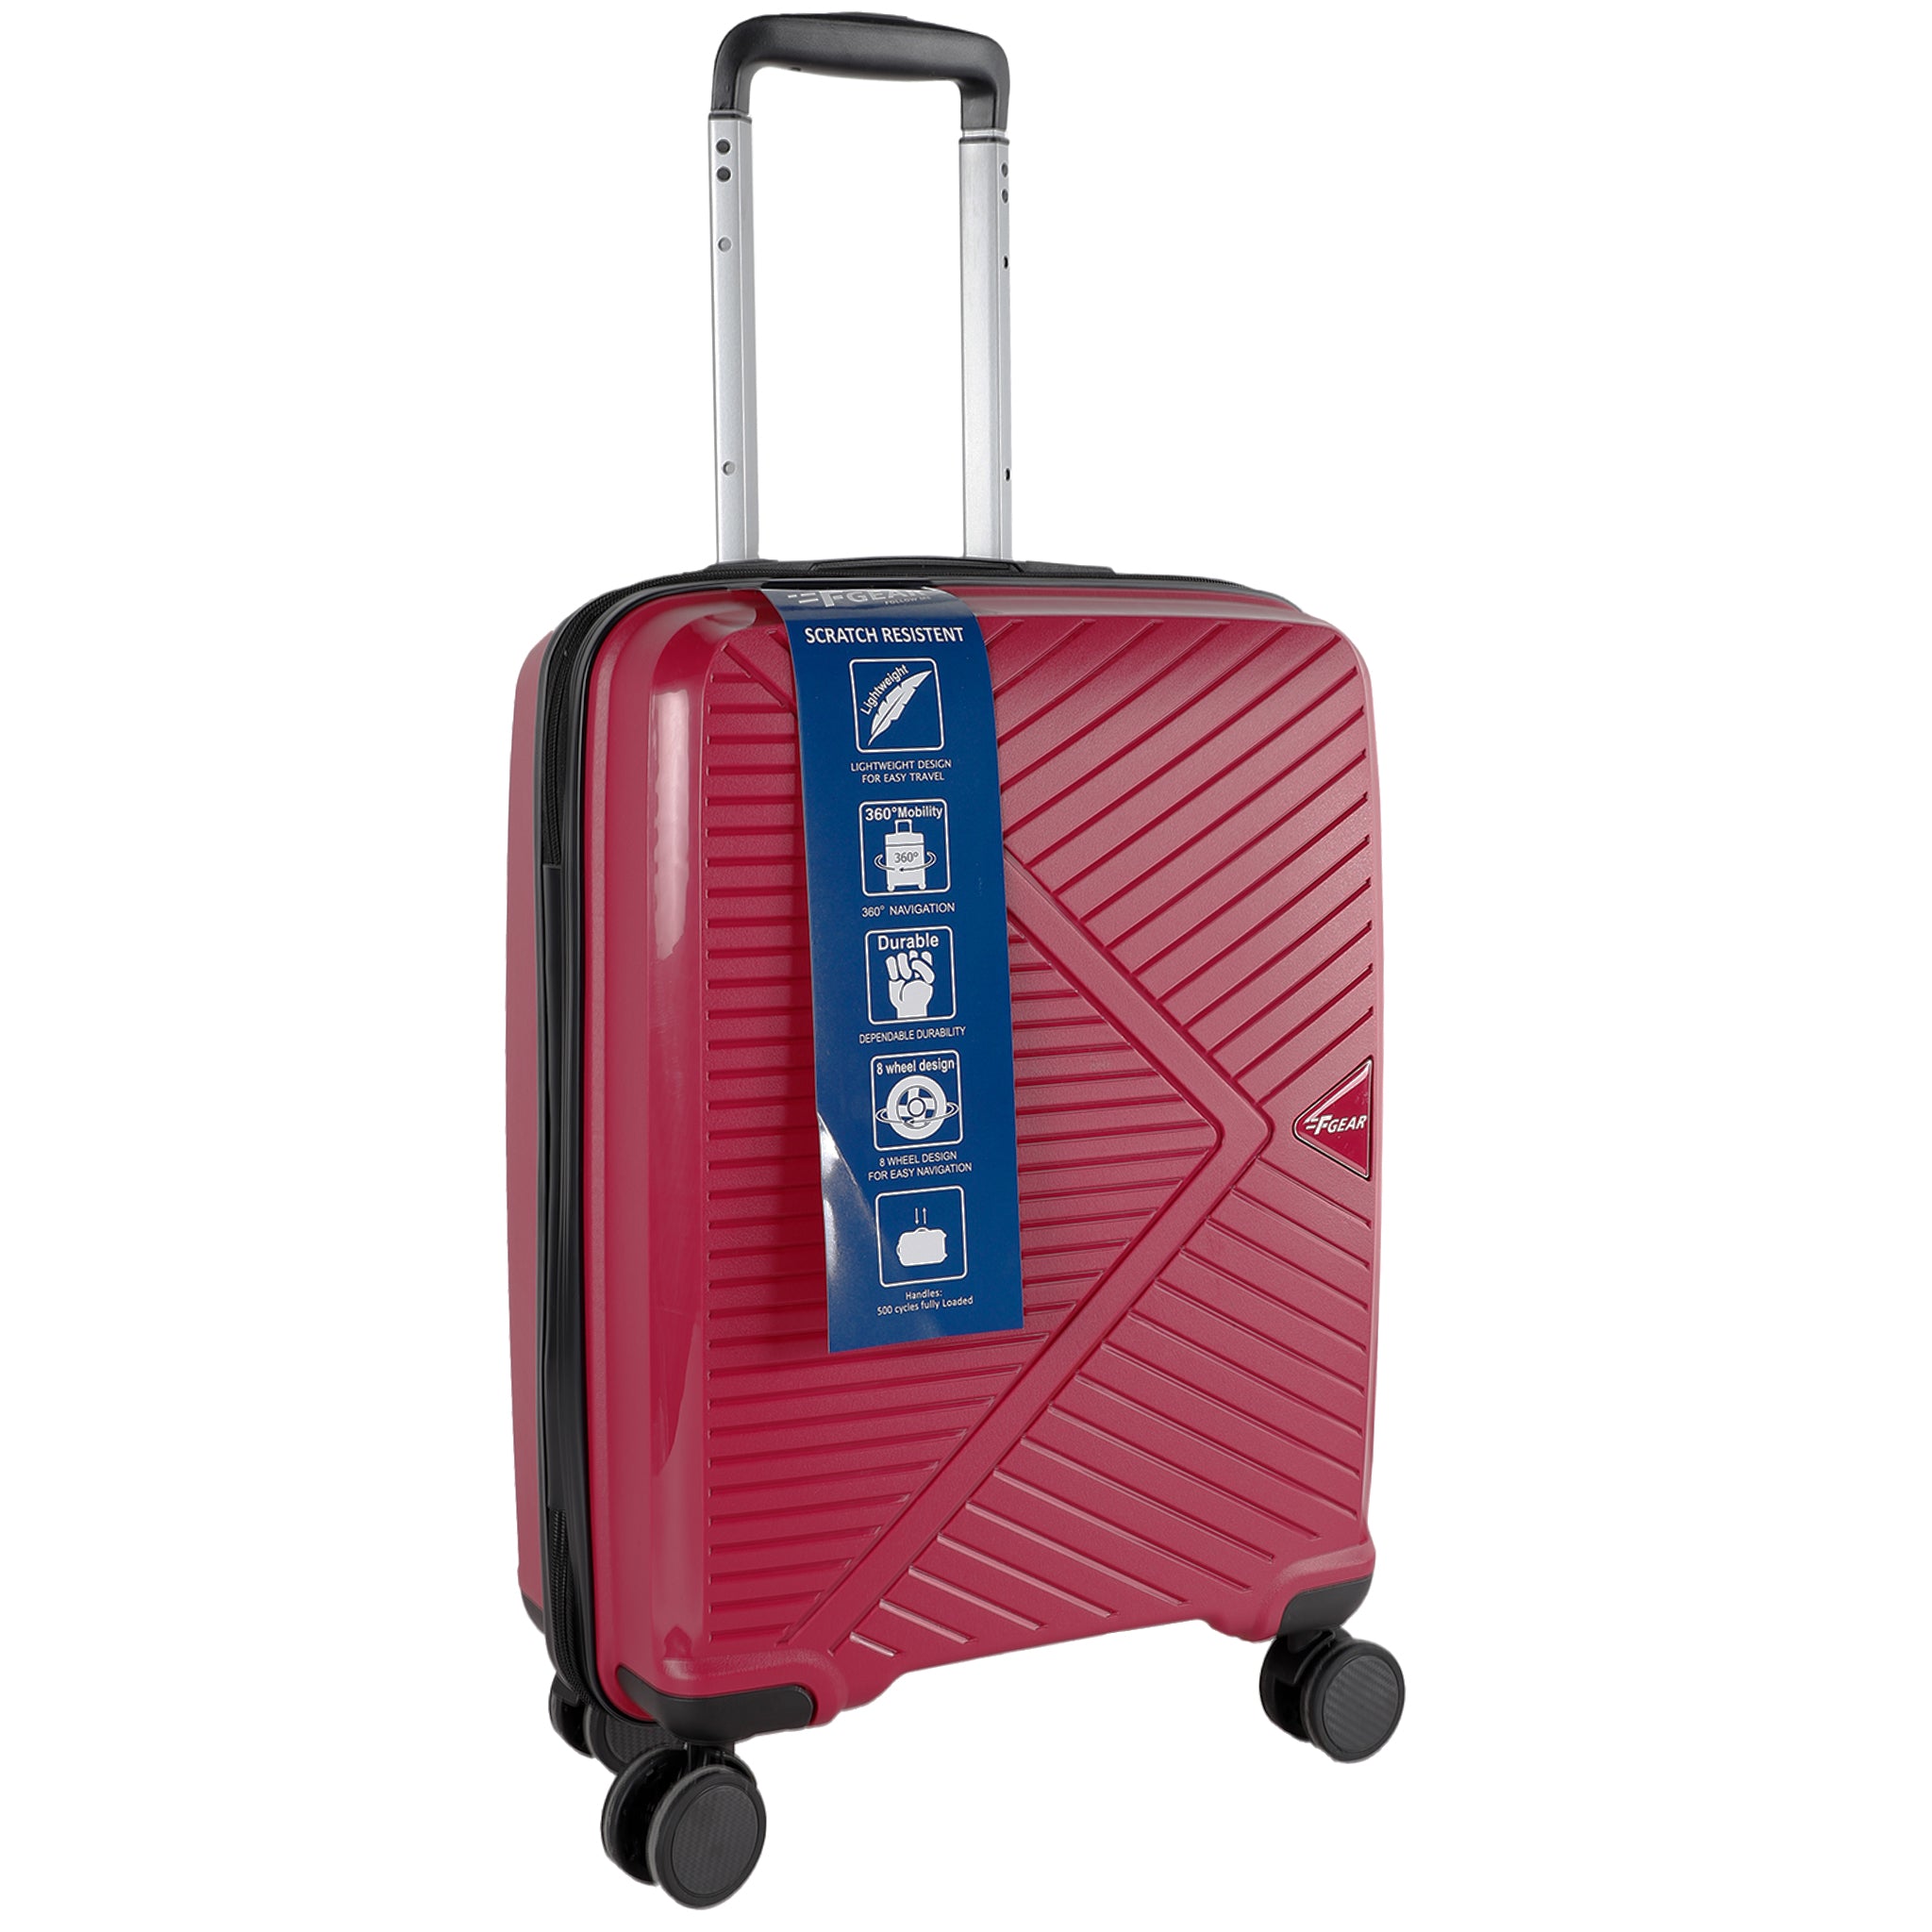 CITY BAG Medium Cabin Luggage 61 c mTrolley Bag Travel bag Two Wheel AND  Number Lock Expandable Cabin  Checkin Set  24 inch BLUE  Price in India   Flipkartcom